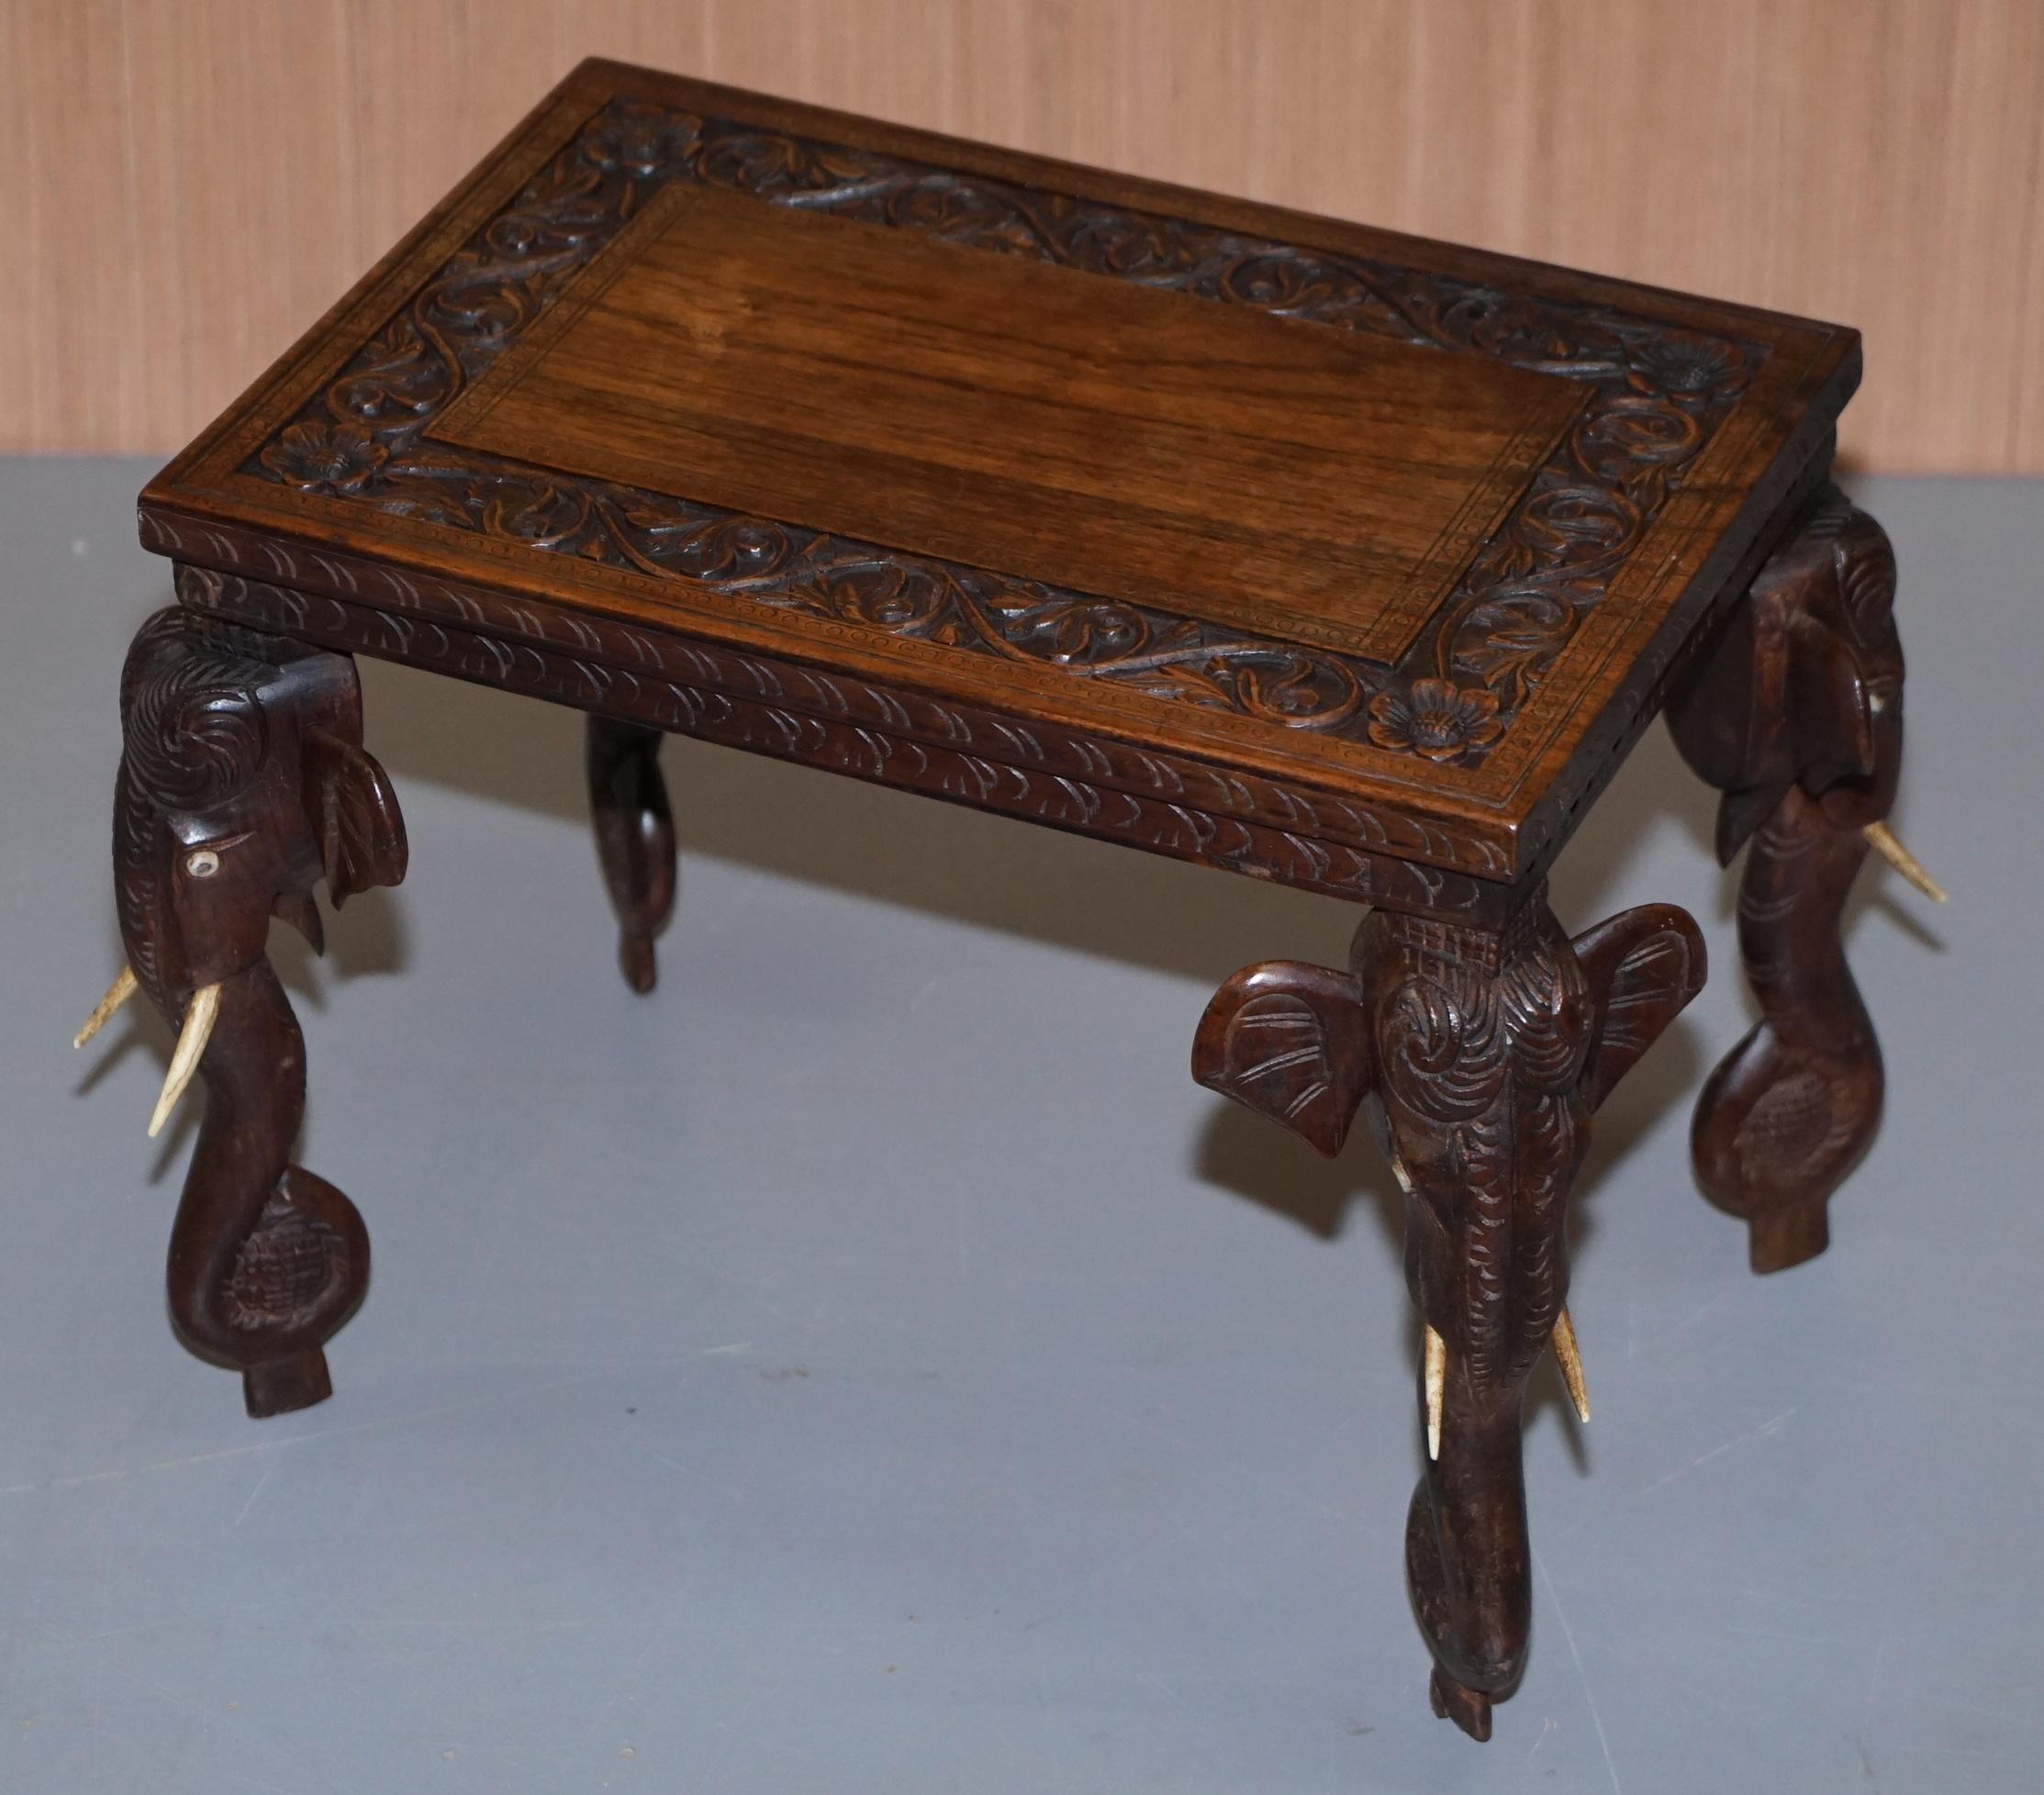 Hand-Crafted Stunning Small circa 1900 Anglo-Indian Elephant Hand Carved Hardwood Side Table